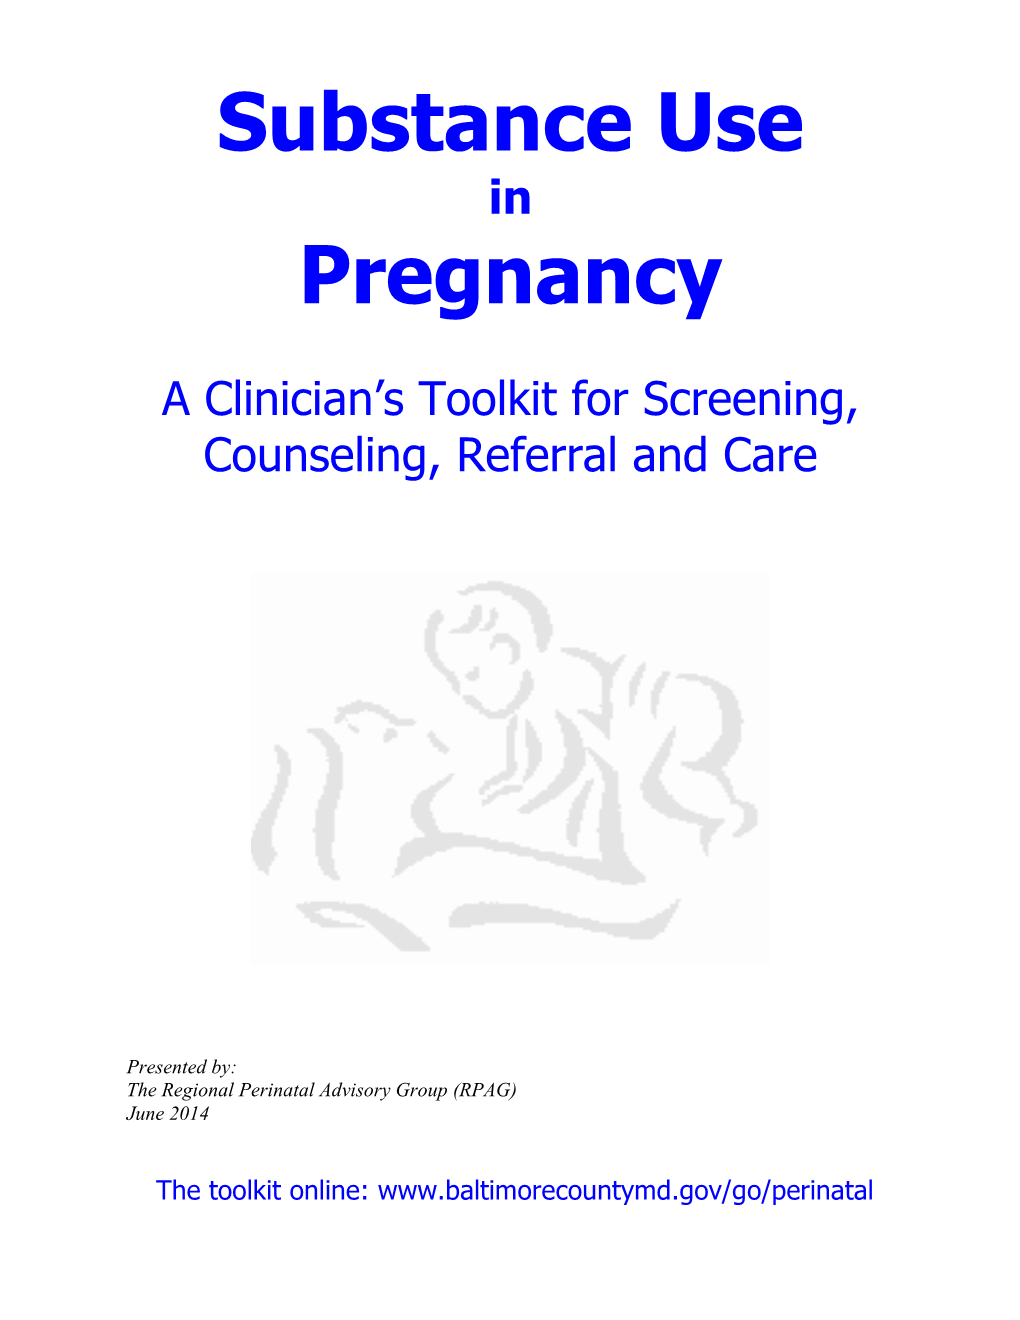 Substance Use in Pregnancy Toolkit 2014 Table of Contents Section.Page 5